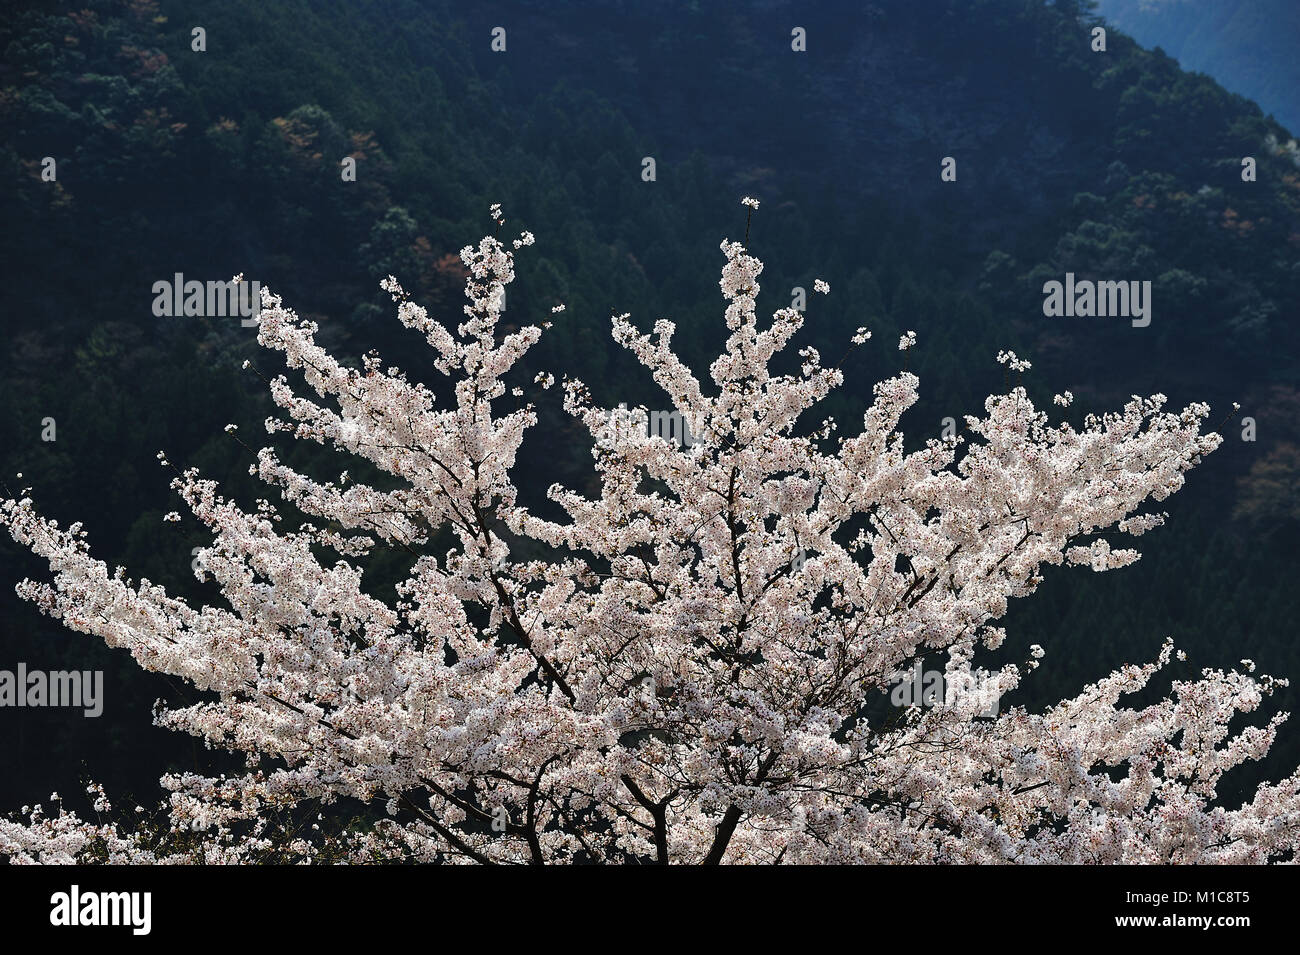 Cherry blossoms in full bloom, Japan Stock Photo